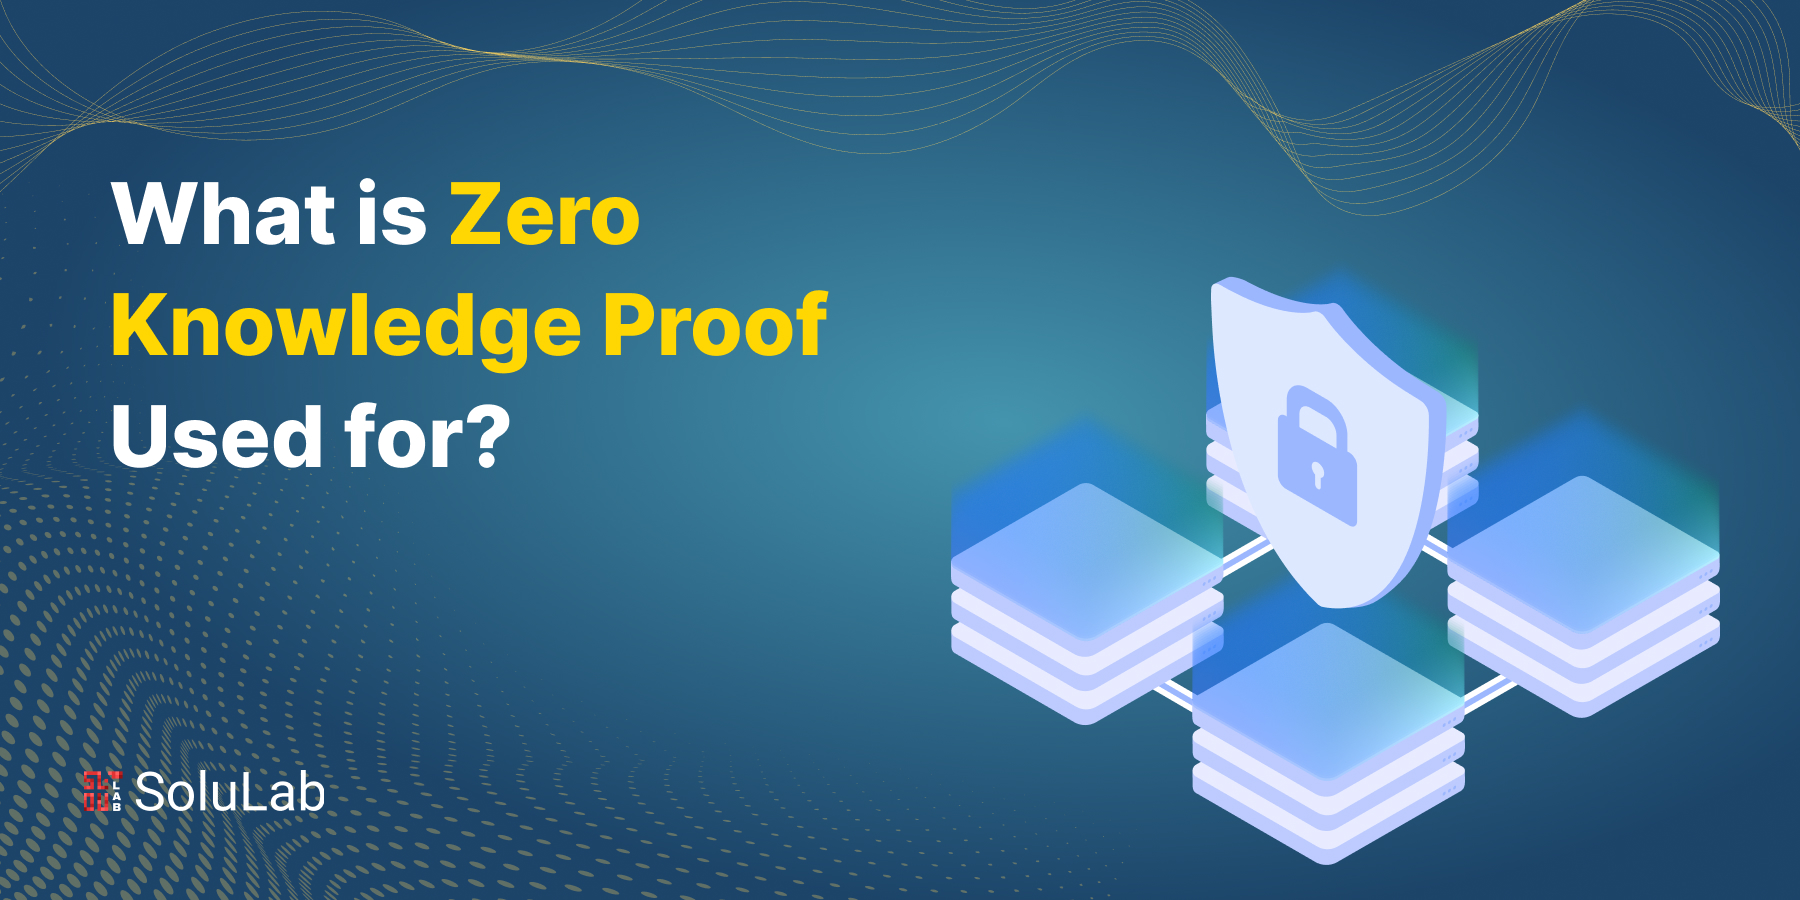 What is Zero Knowledge Proof Used For?